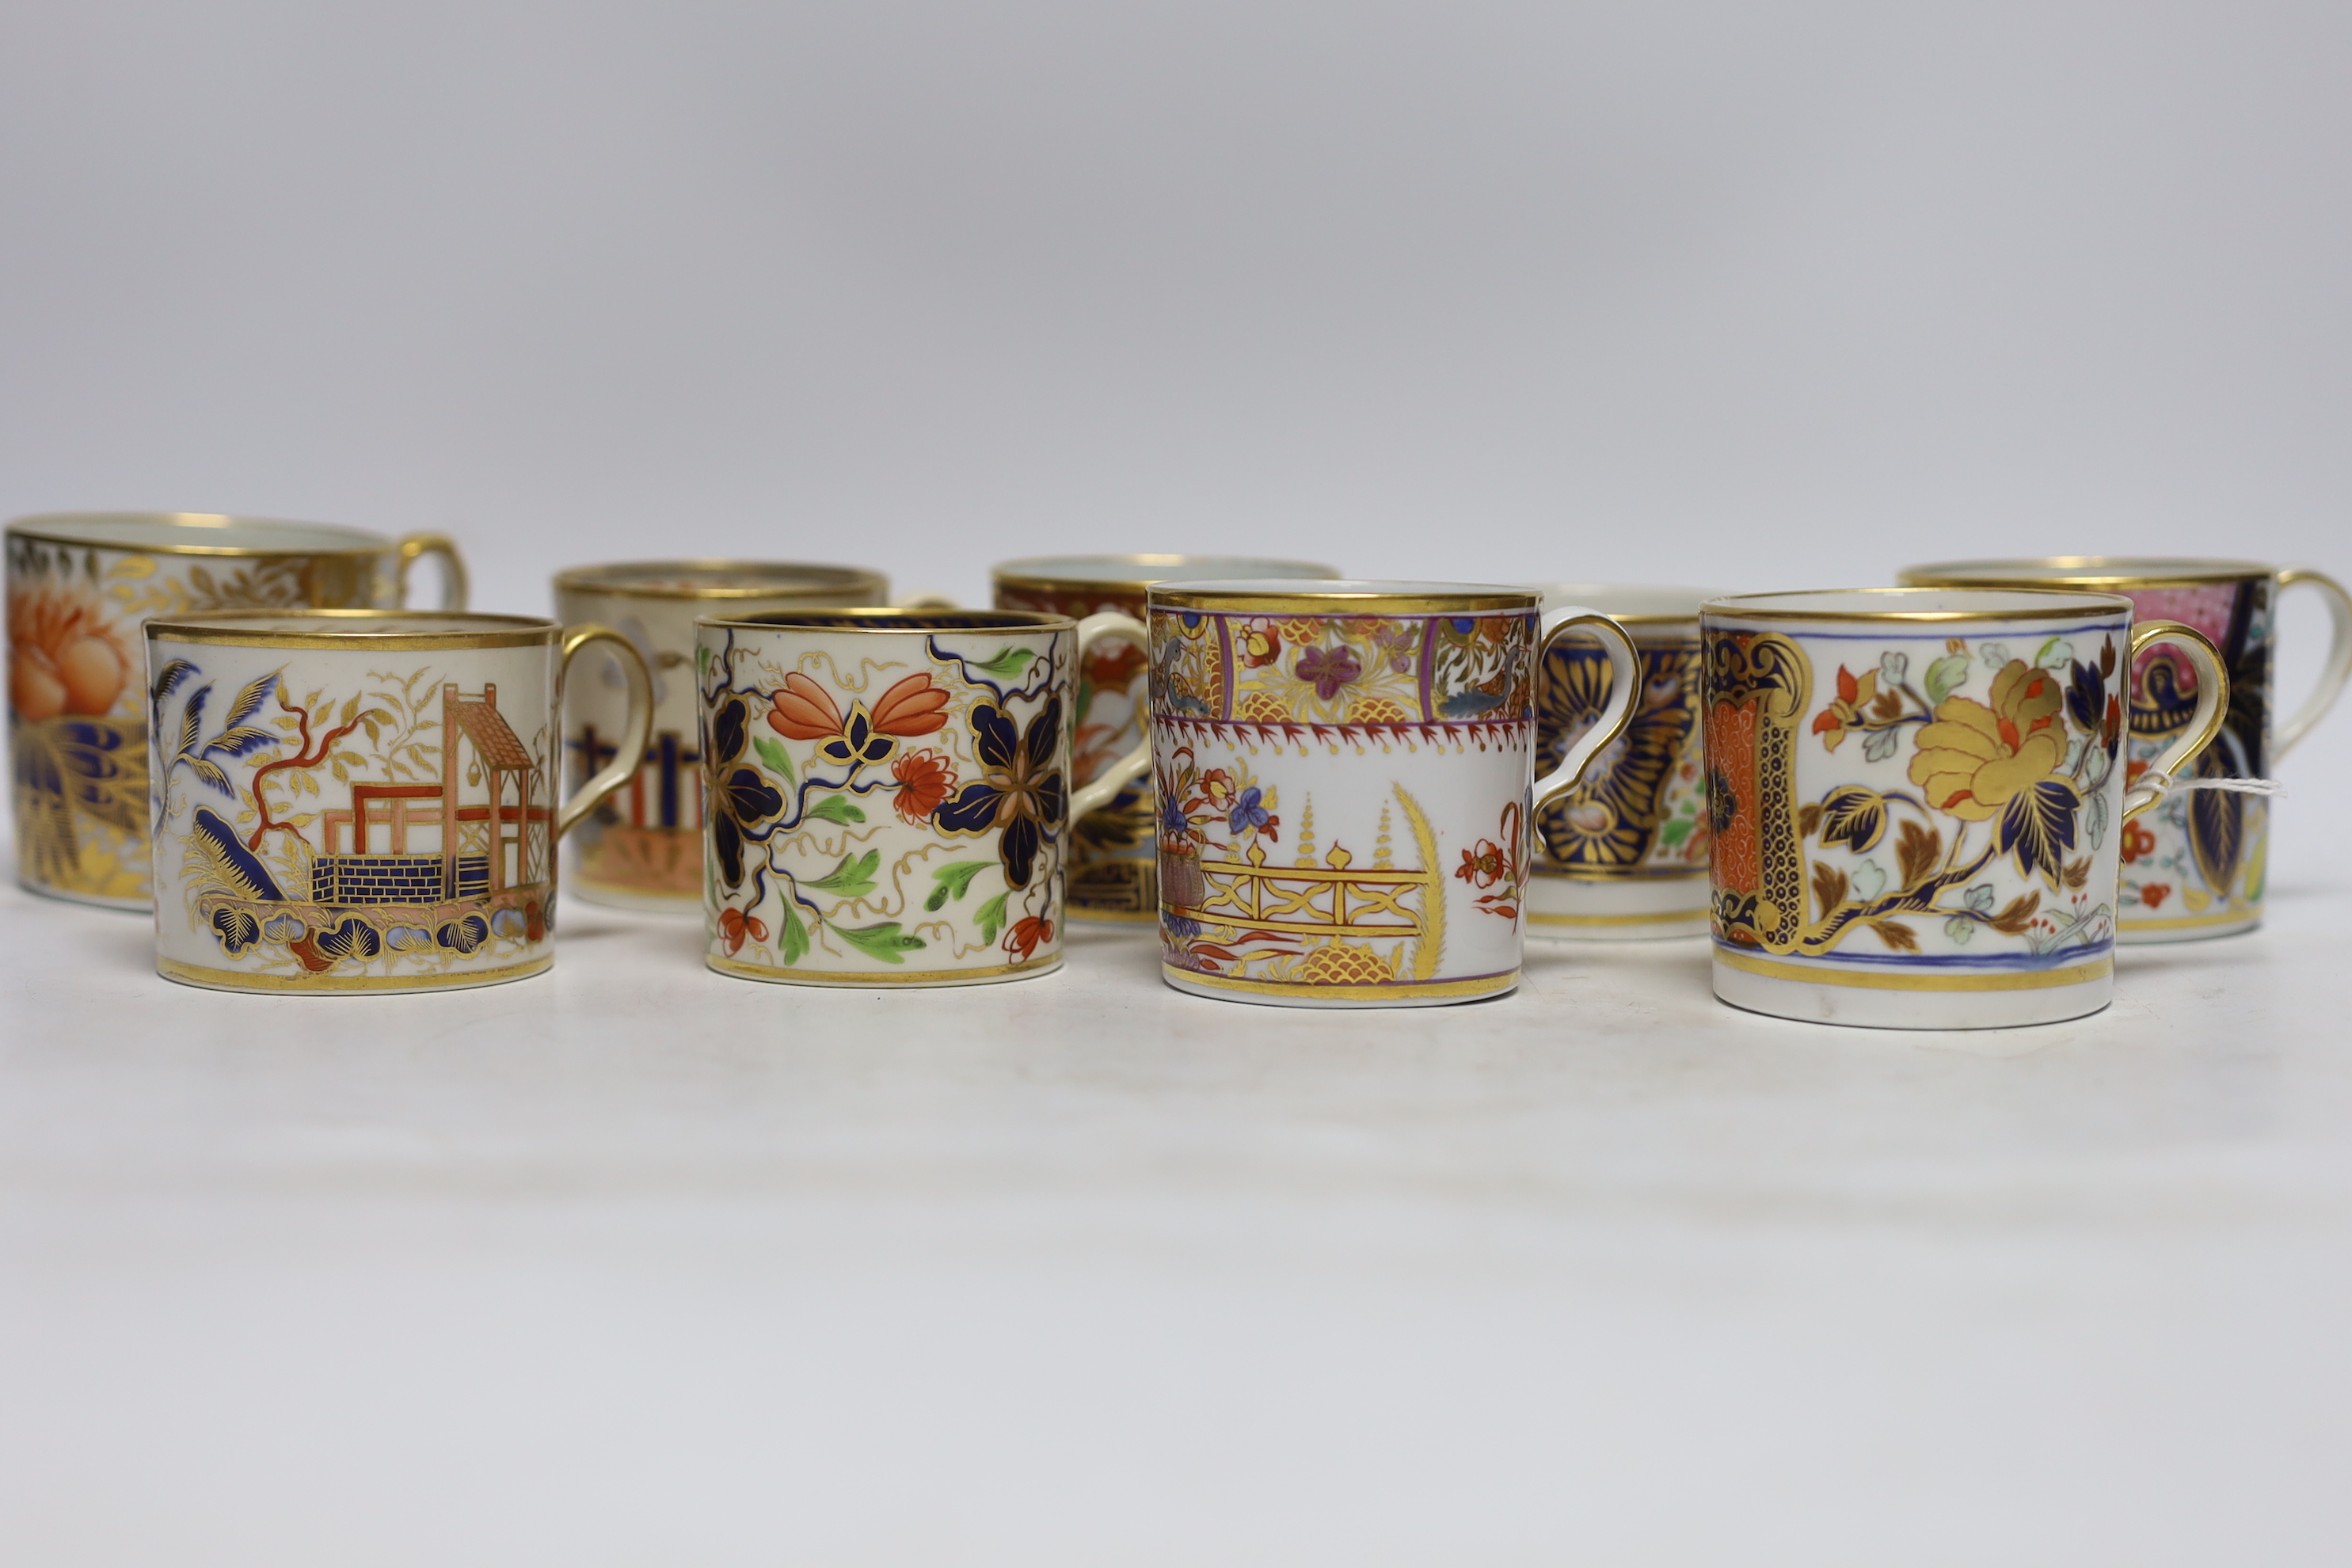 Twelve 1800-1820 English porcelain coffee cans, including Imari pattern examples